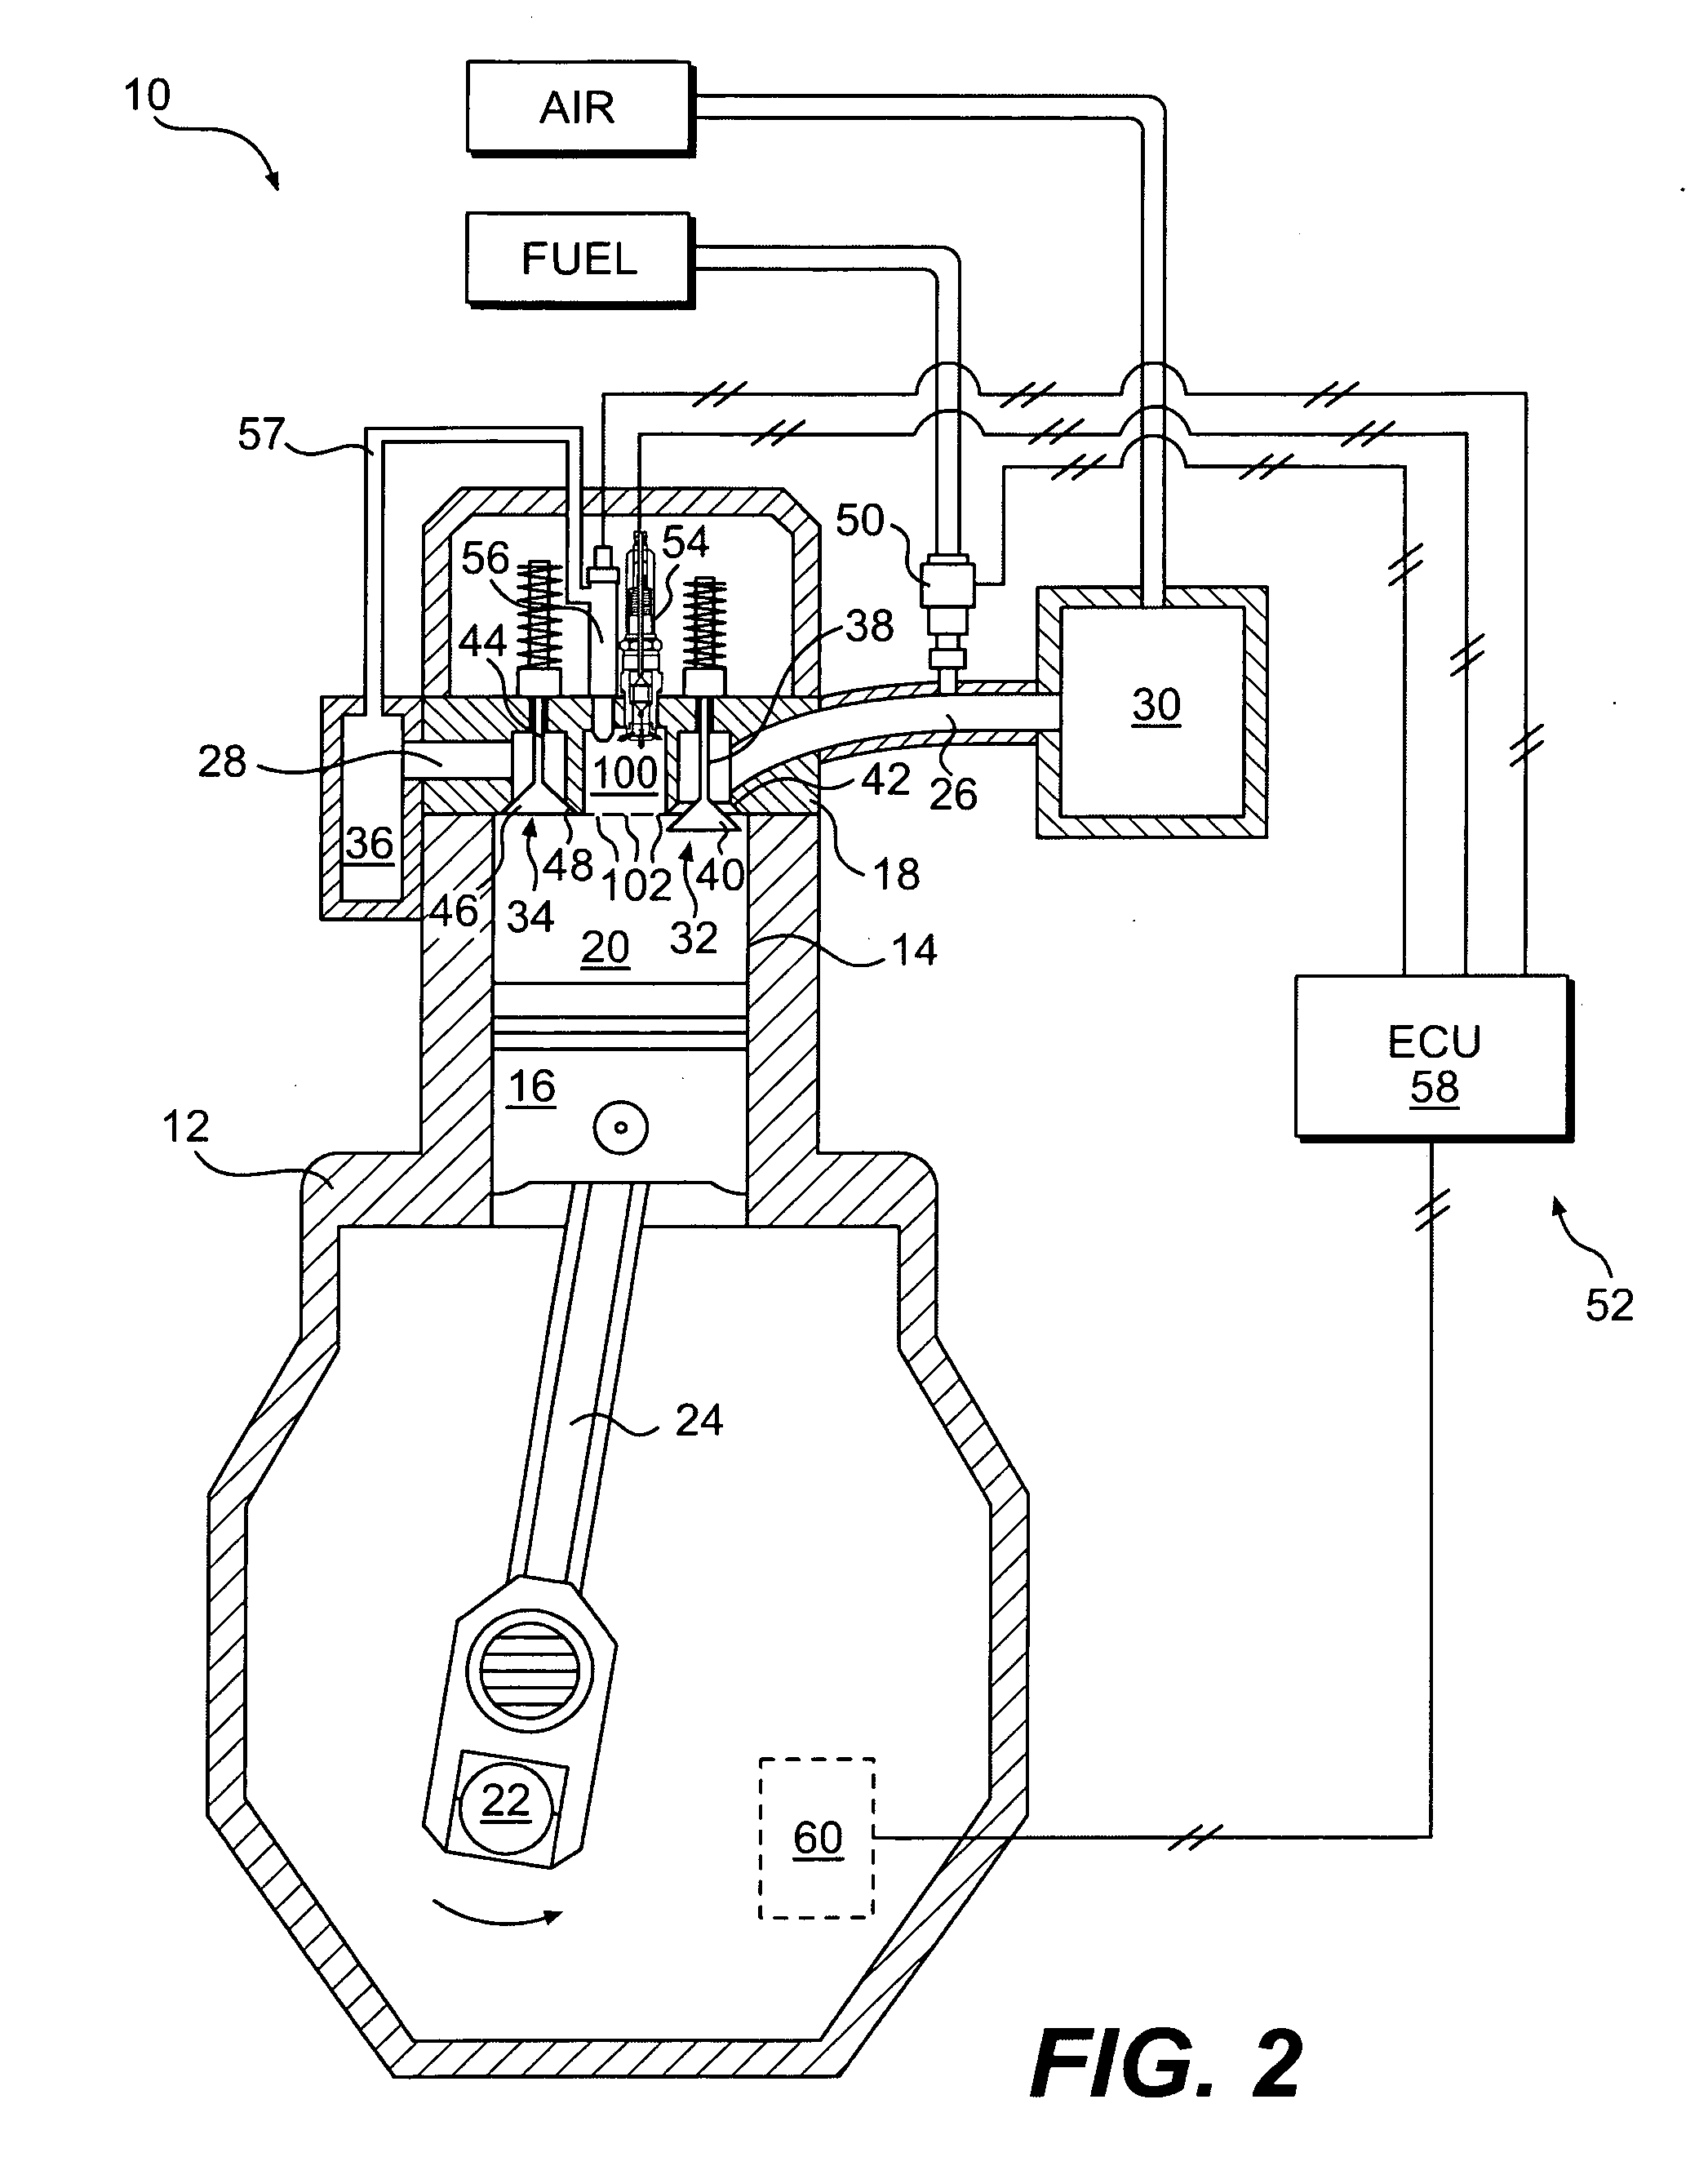 Ignition system utilizing igniter and gas injector